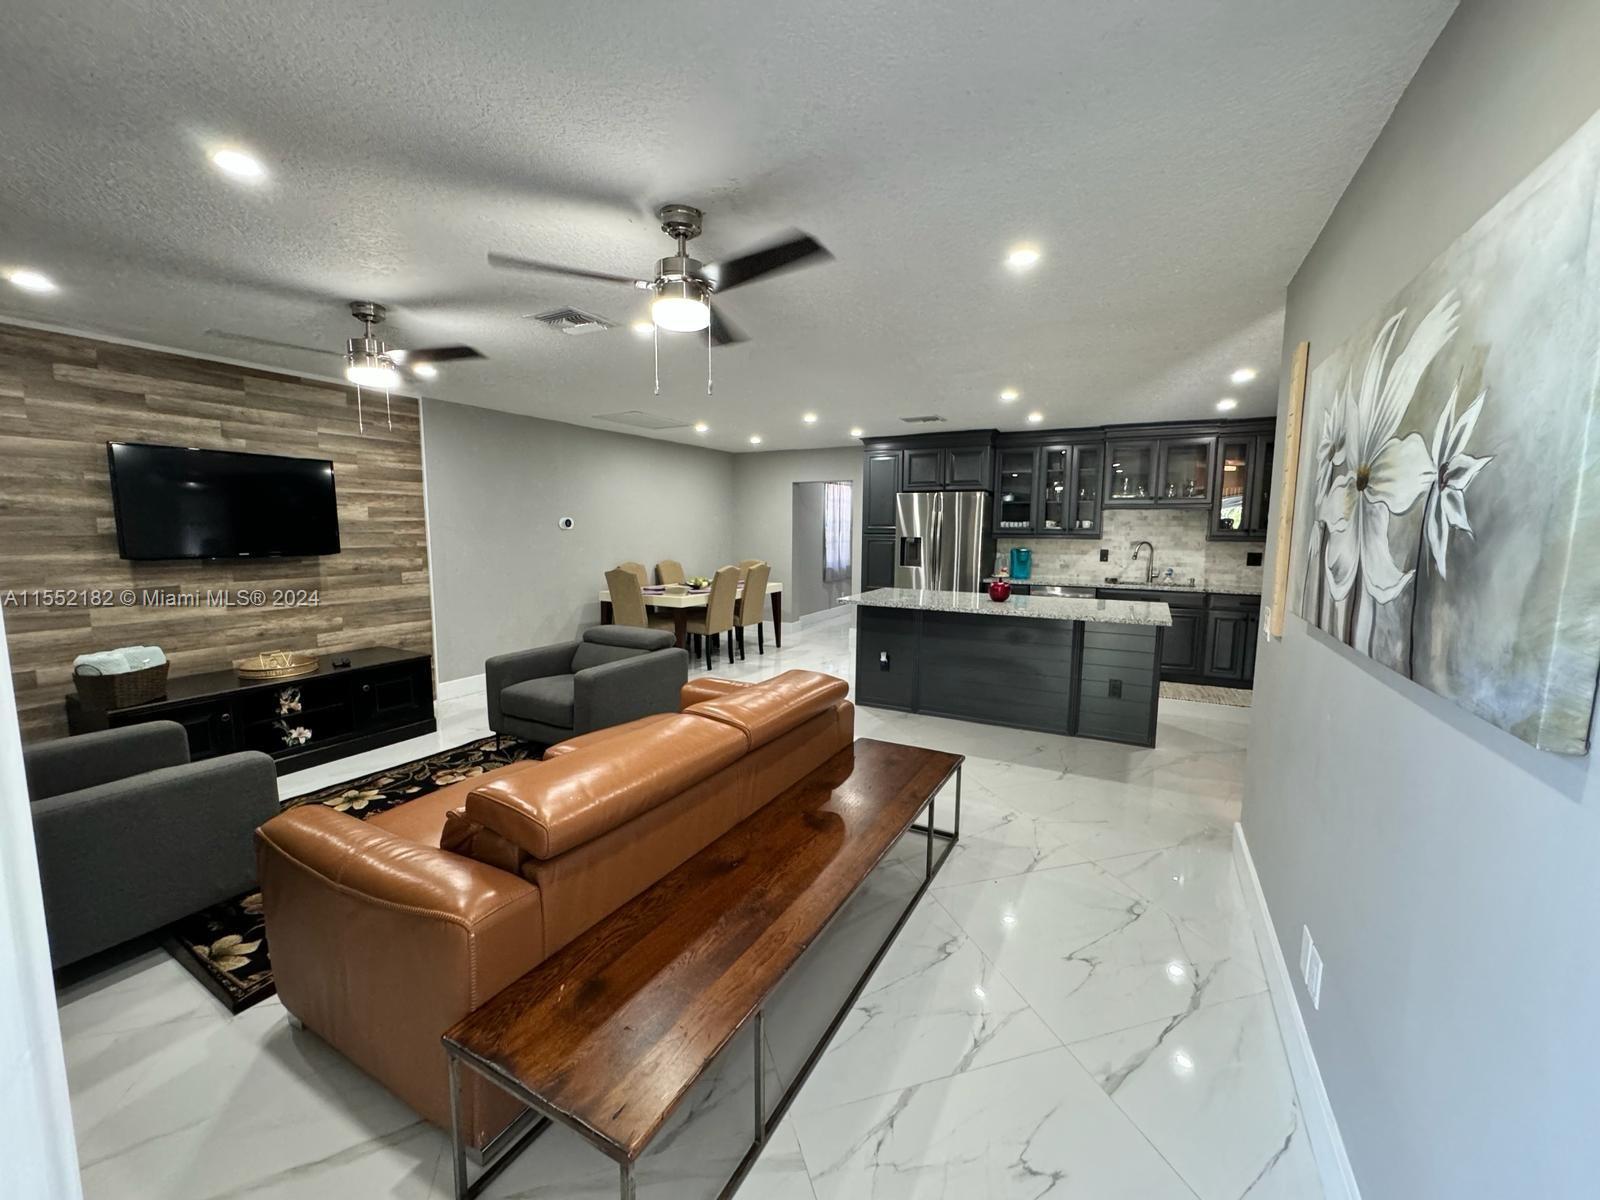 a large living room with stainless steel appliances furniture a flat screen tv and a kitchen view